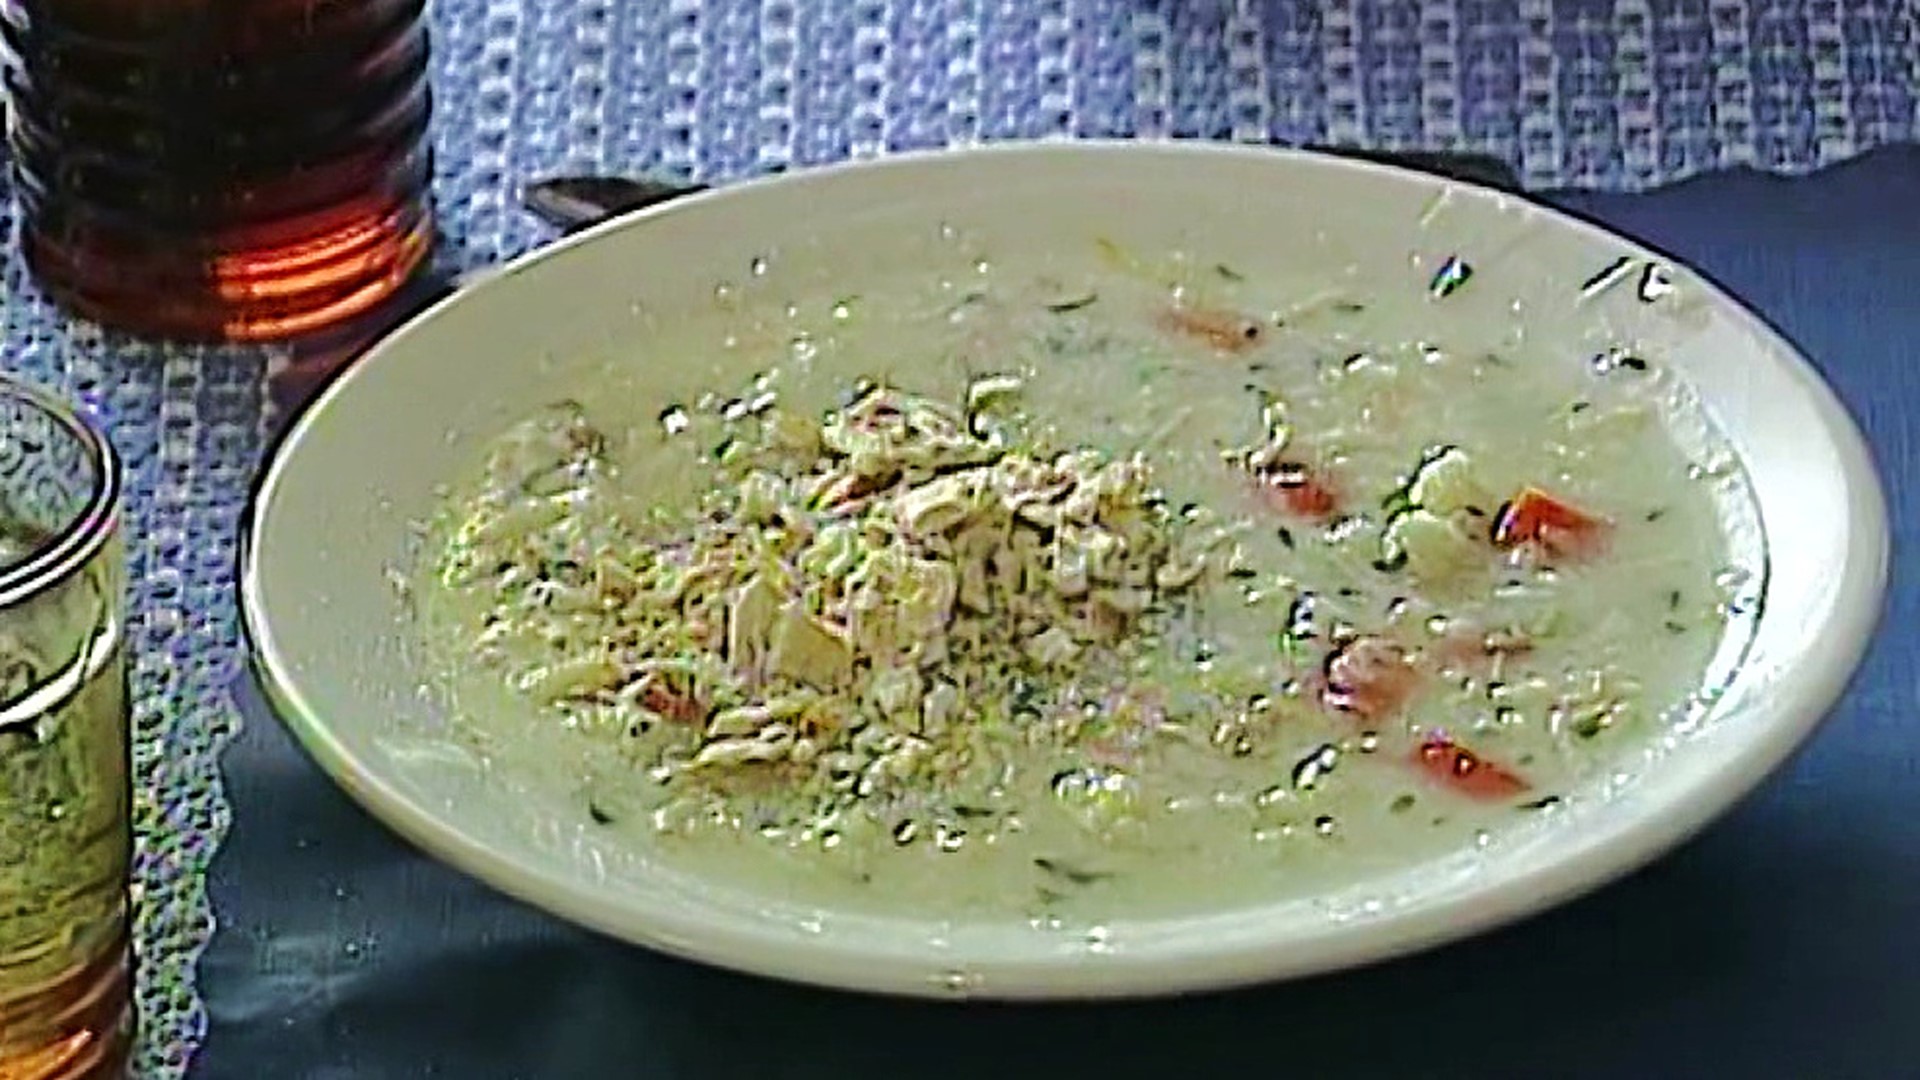 Mike Stevens says the cold, cruel world just seems better after a bowl of soup.